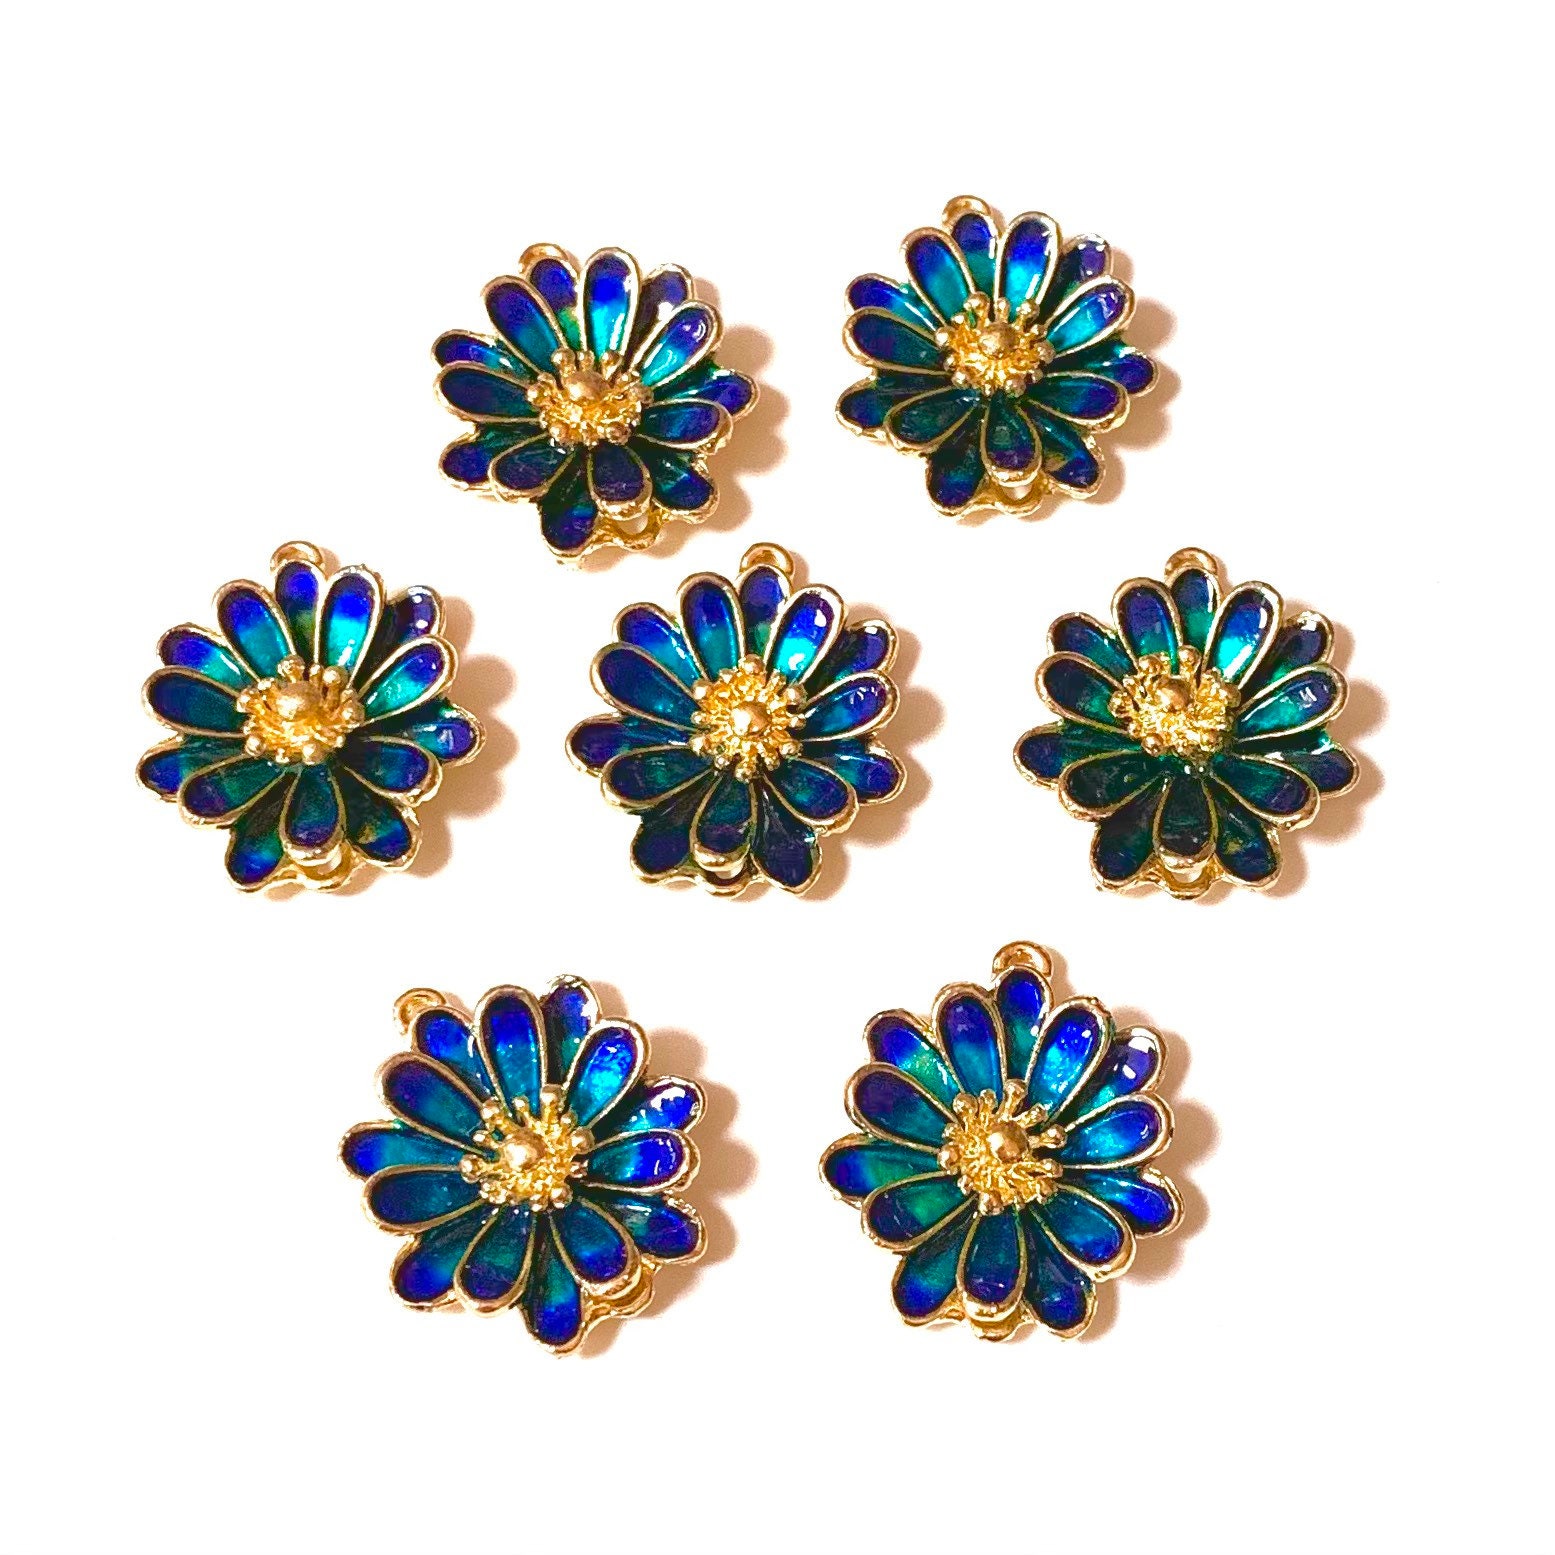 Cloisonne Flower Enamel Charms in a Beautiful Blue/Green with a